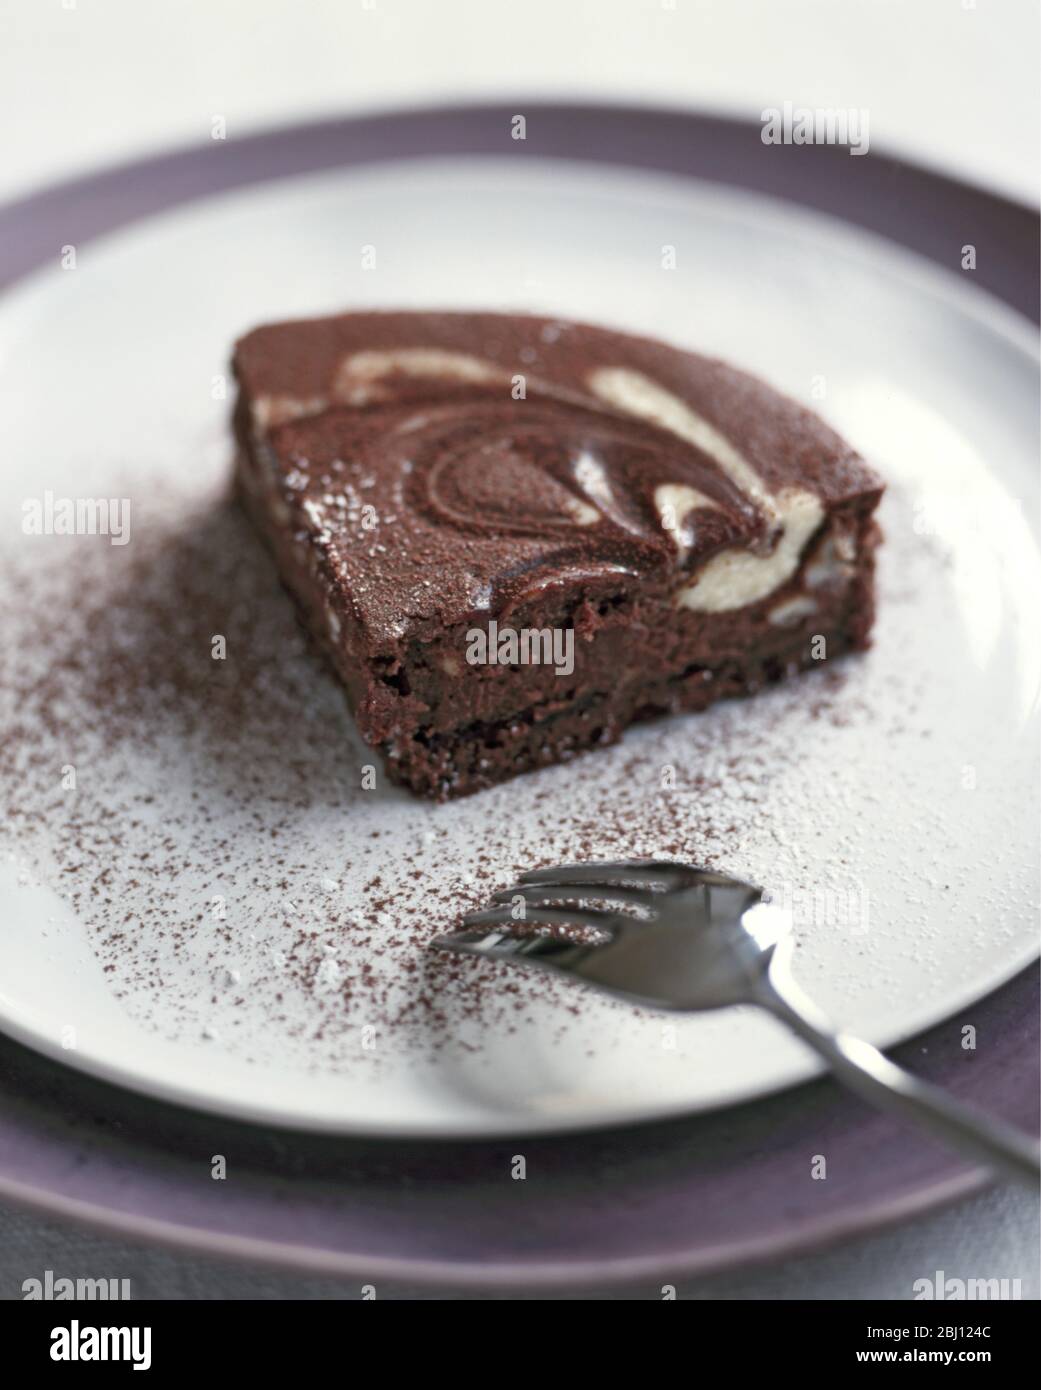 Portion of chocolate tart on plate with spoon - Stock Photo